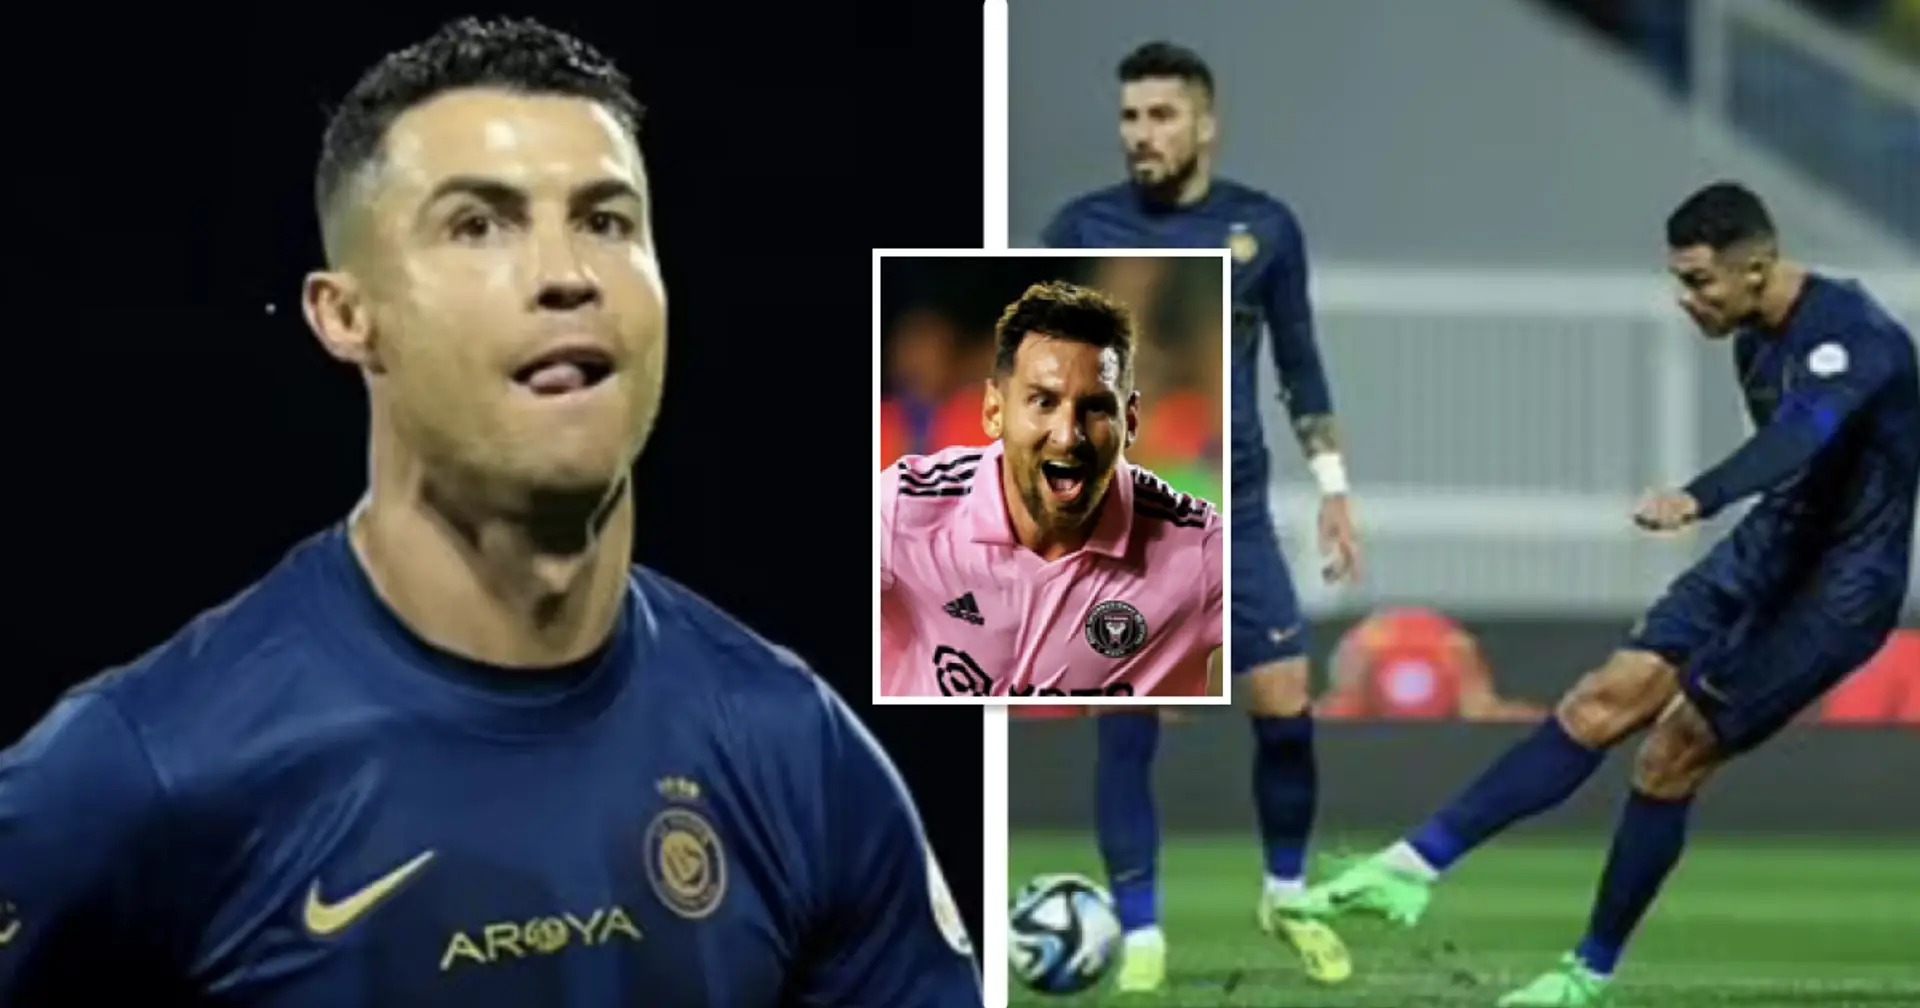 Cristiano Ronaldo scores 2 free-kick goals in single game for Al Nassr – is he ahead of Leo Messi now?